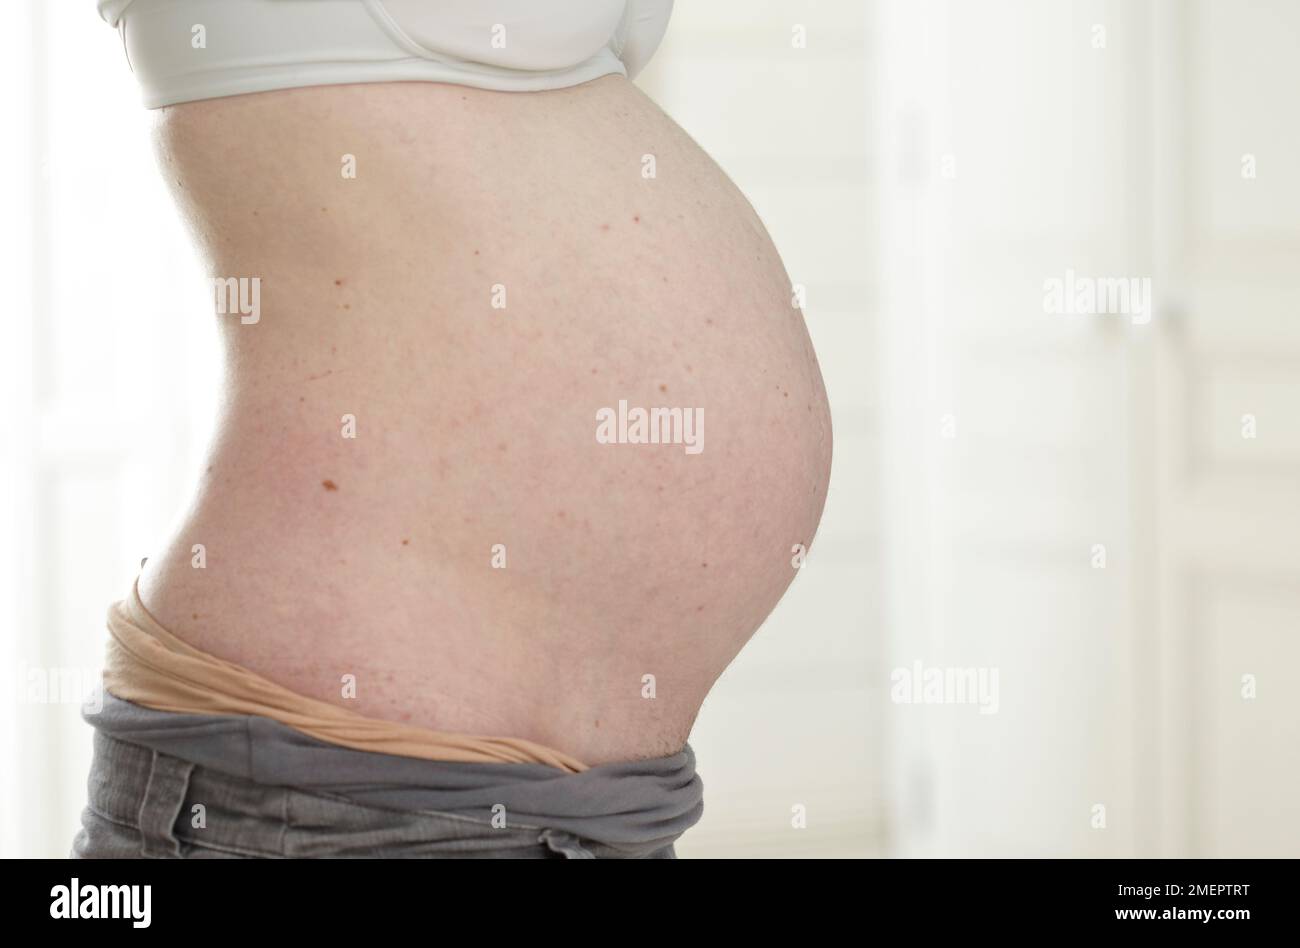 Pregnant woman's stomach, side view Stock Photo